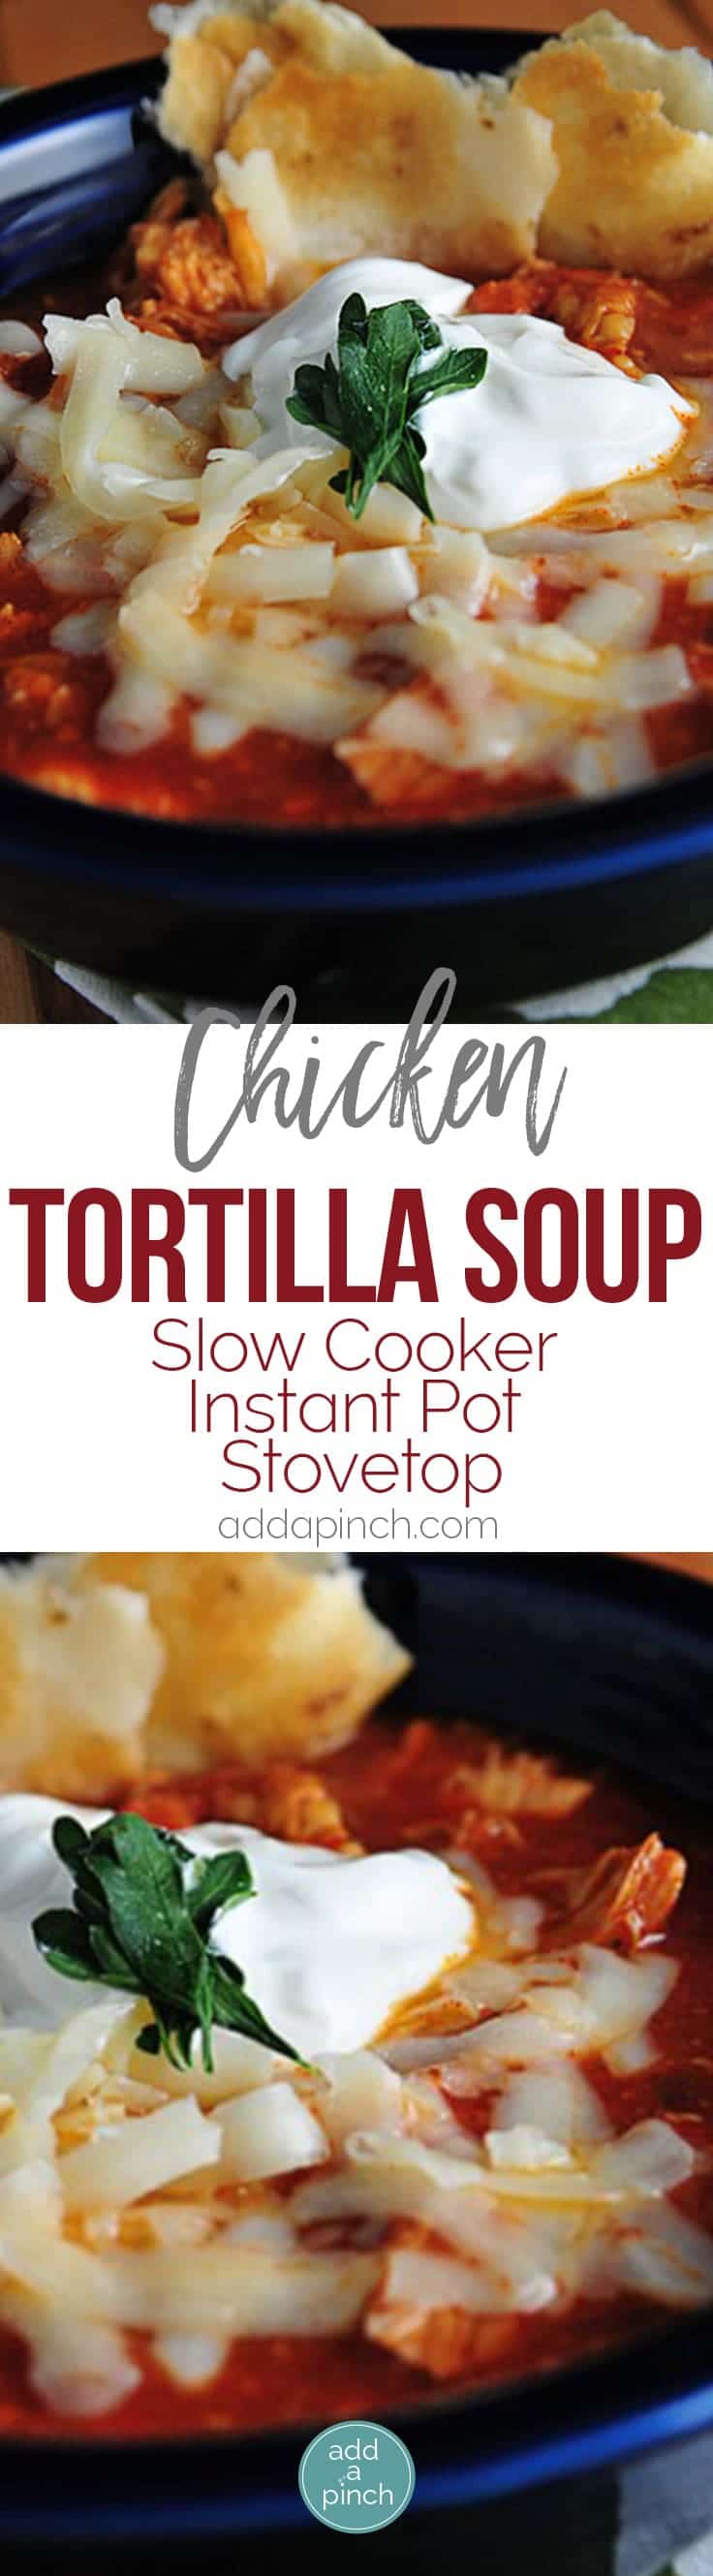 Chicken Tortilla Soup Recipe (Slow Cooker, Instant Pot, and Stovetop Instructions) - This easy Chicken Tortilla Soup makes a scrumptious soup with little effort. With slow cooker, Instant Pot and stovetop instructions included! // addapinch.com